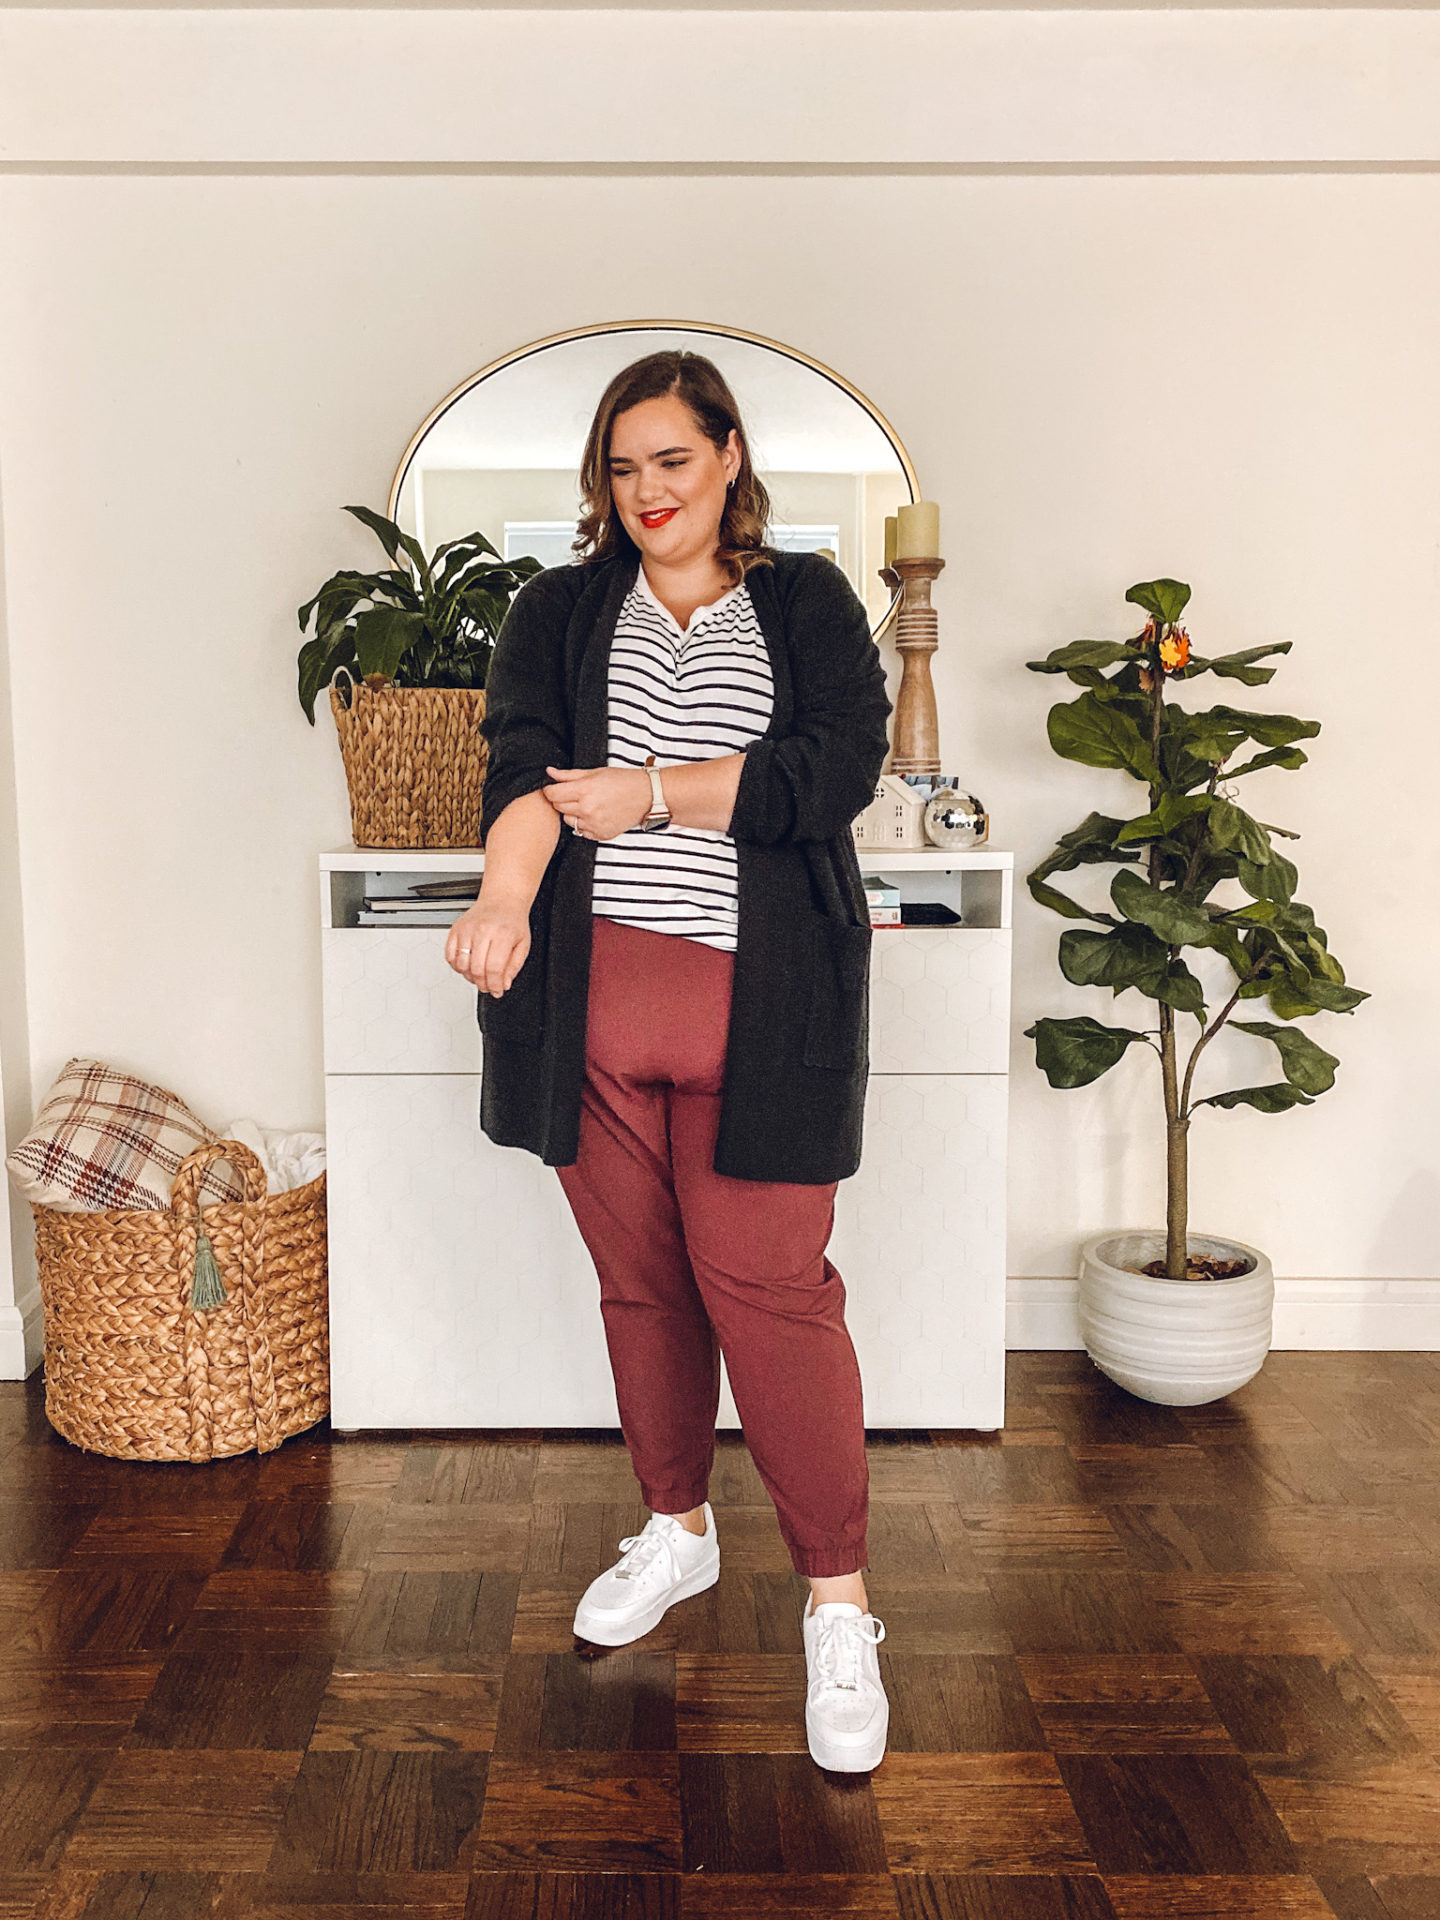 How to Style a Striped Shirt Five Ways